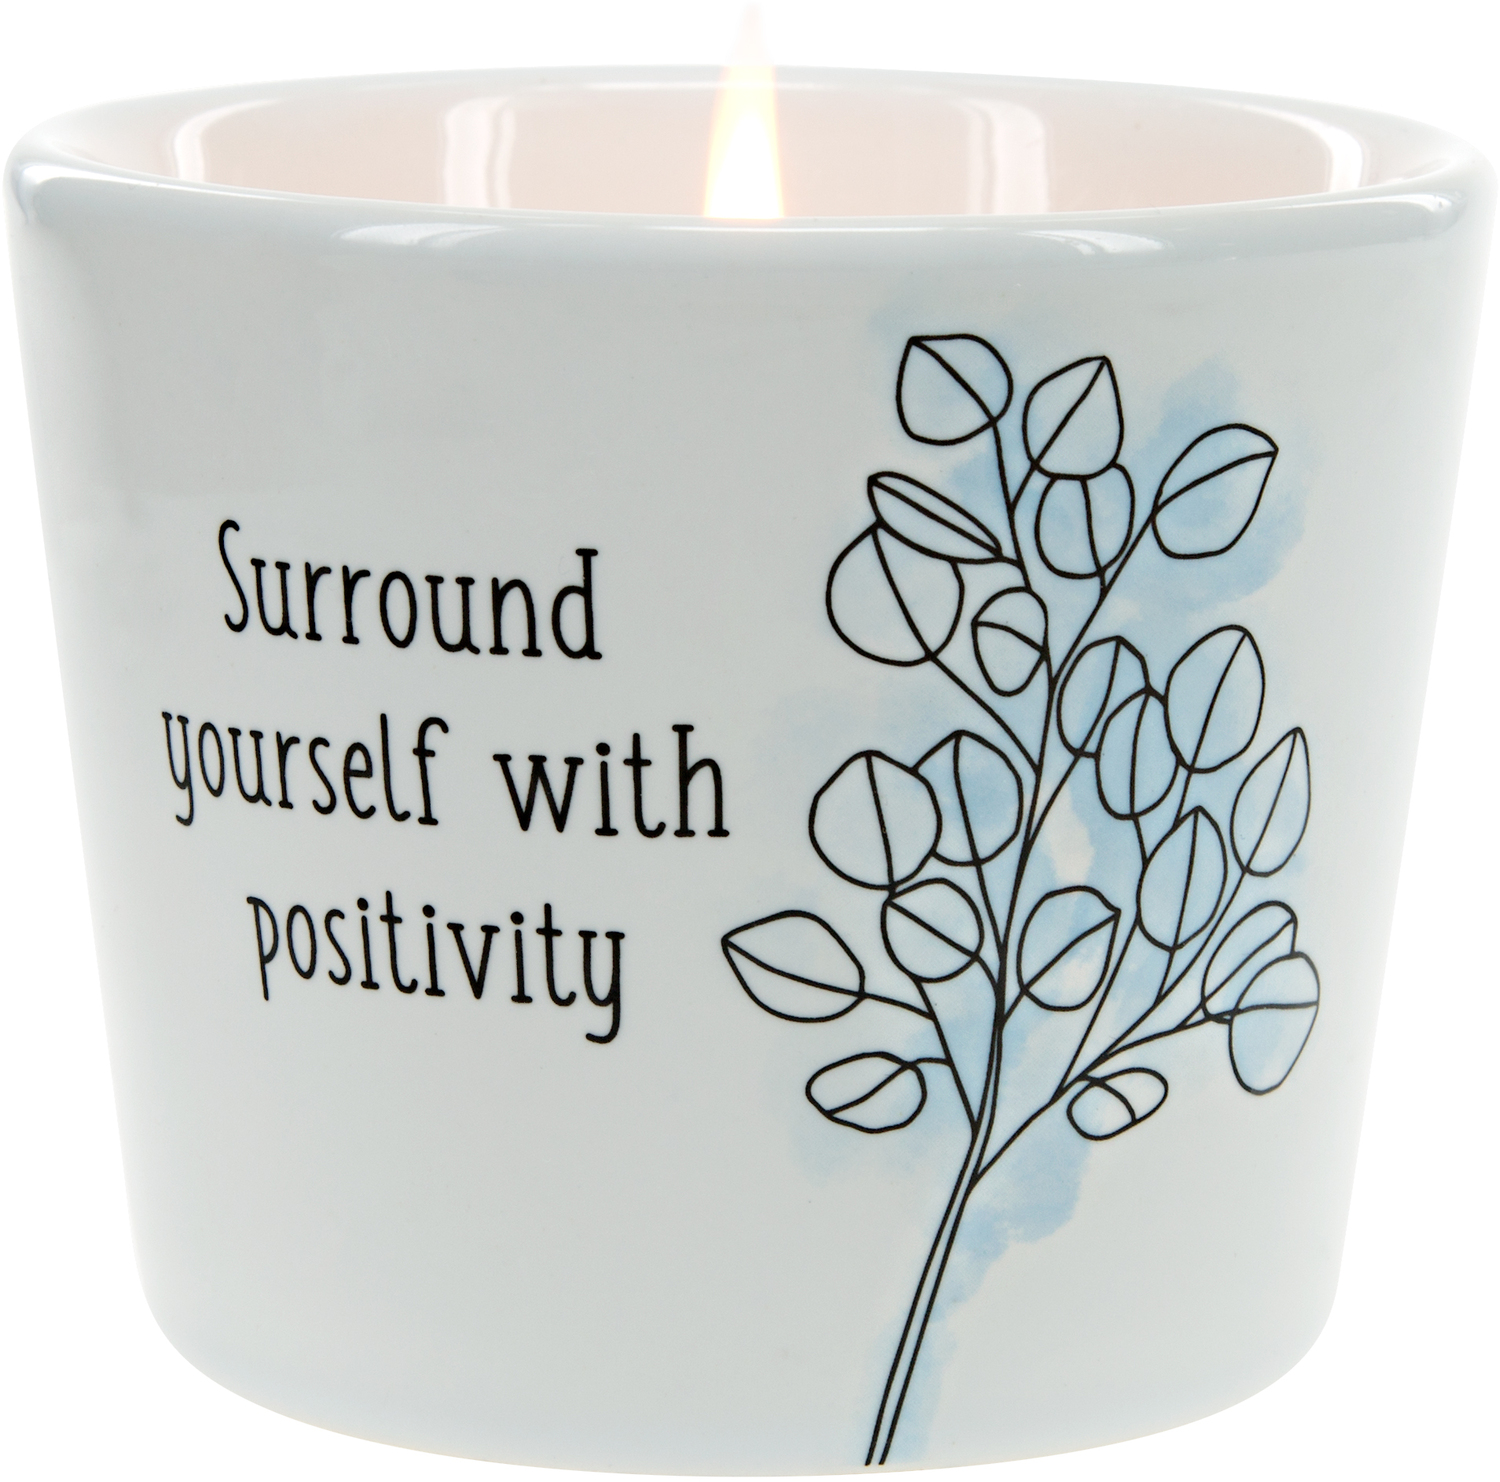 Positivity by Faith Hope and Healing - Positivity - 8 oz - 100% Soy Wax Candle Scent: Tranquility